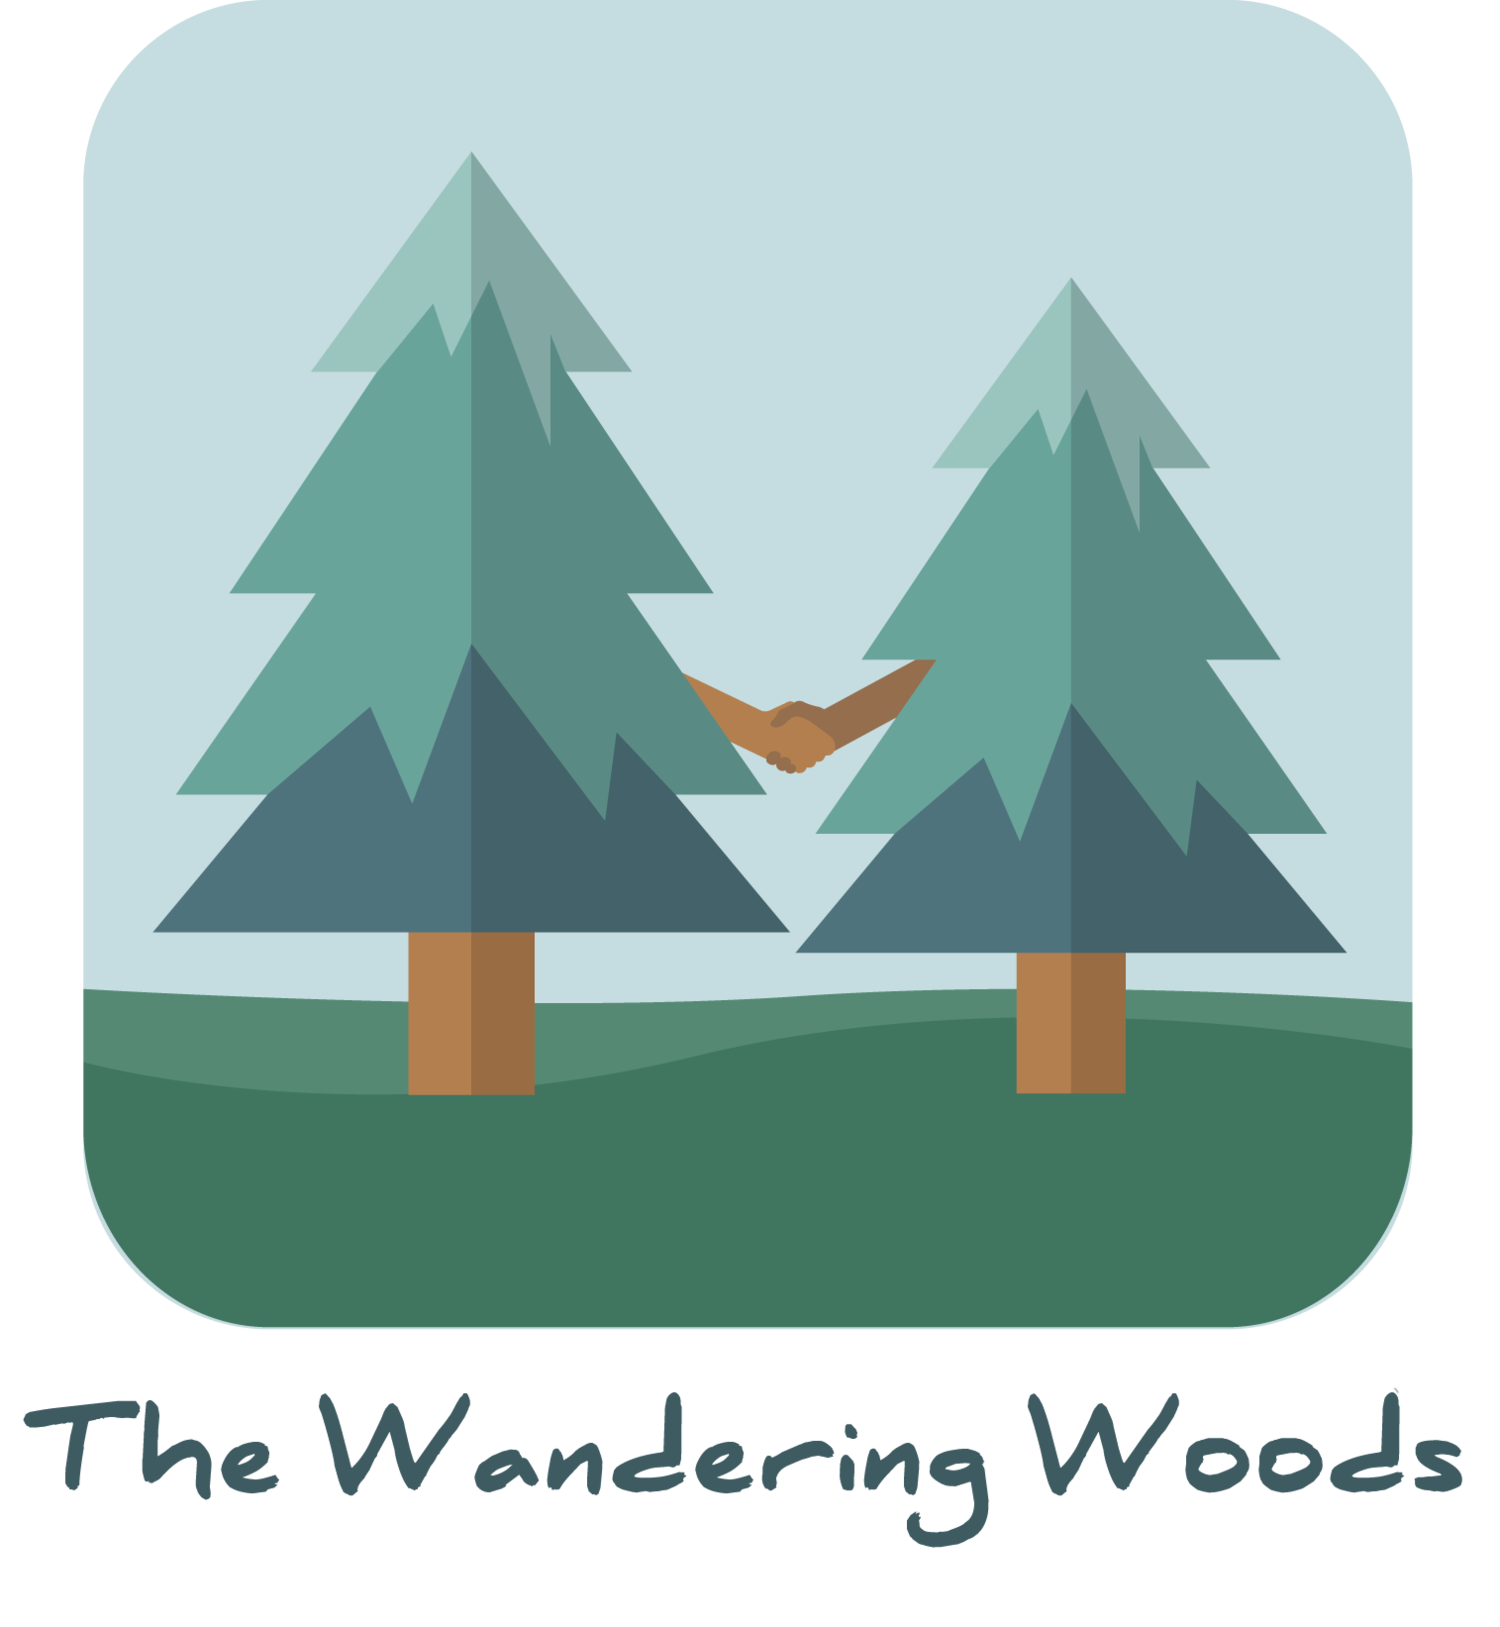 The Wandering Woods